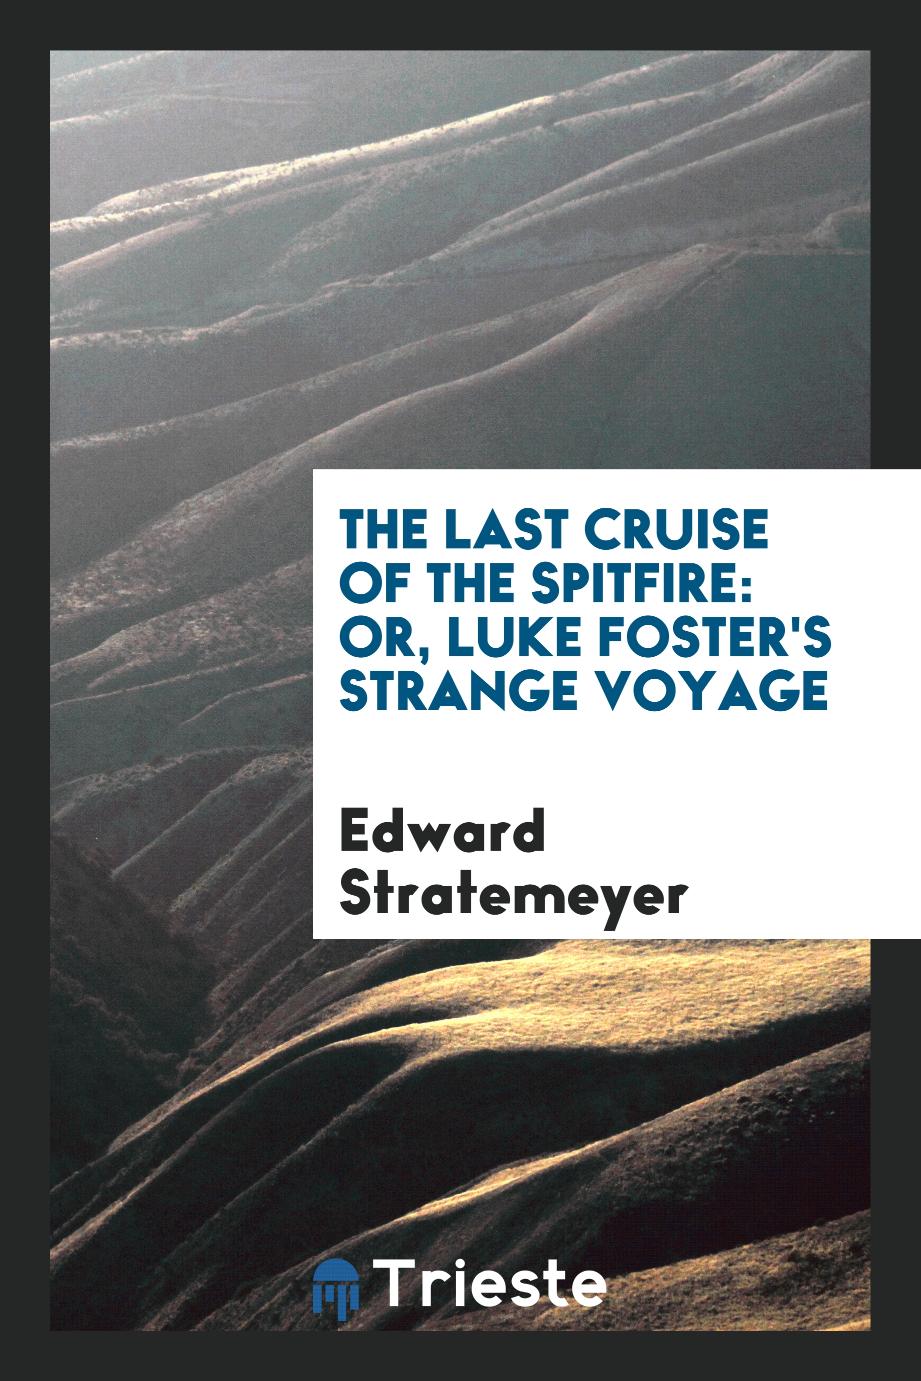 The last cruise of the Spitfire: or, Luke Foster's strange voyage